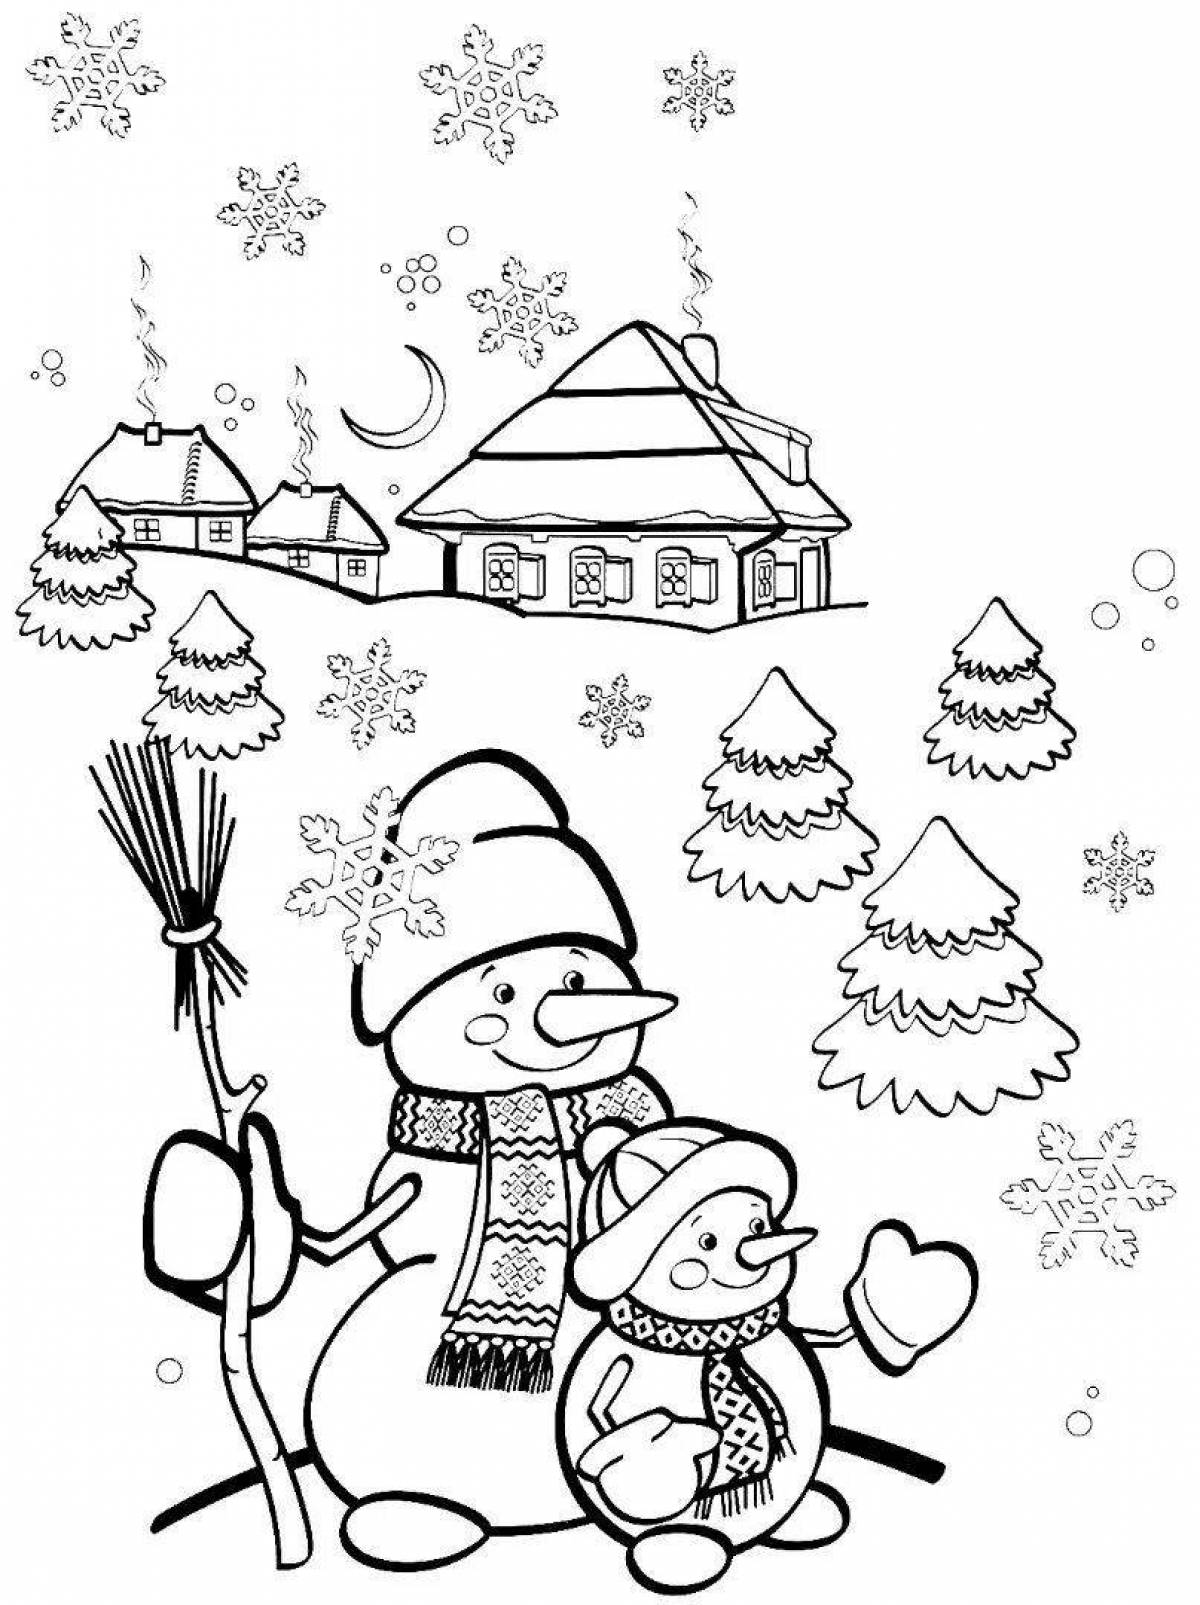 Blizzardy wonderland coloring page